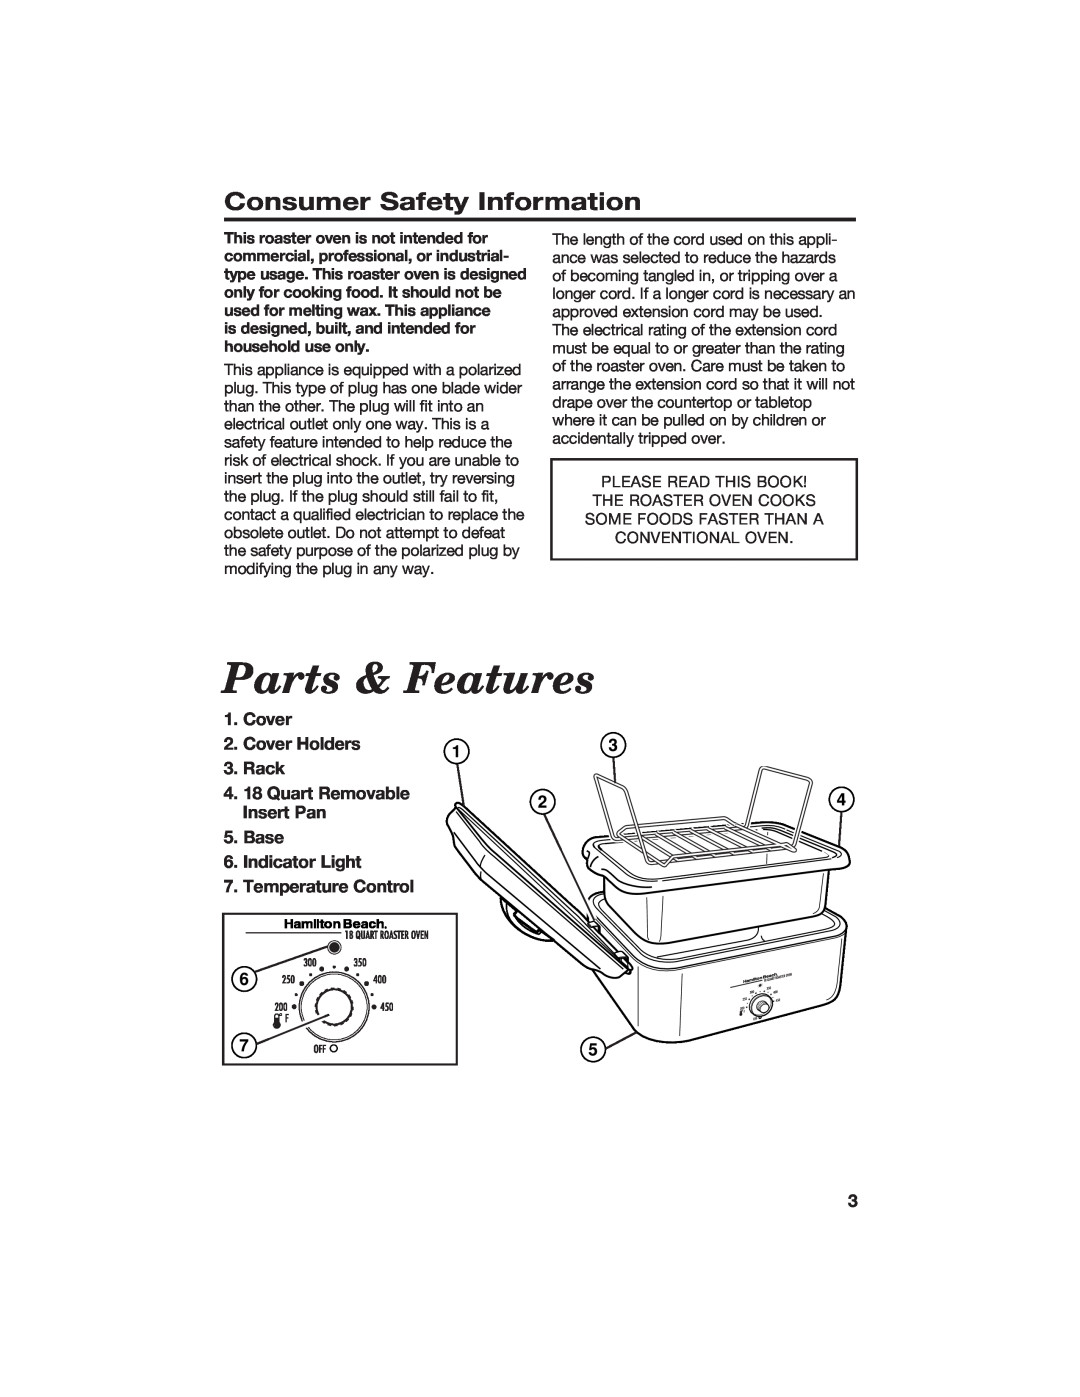 Hamilton Beach Roaster Oven manual Parts & Features, Consumer Safety Information, Cover 2. Cover Holders 3. Rack 